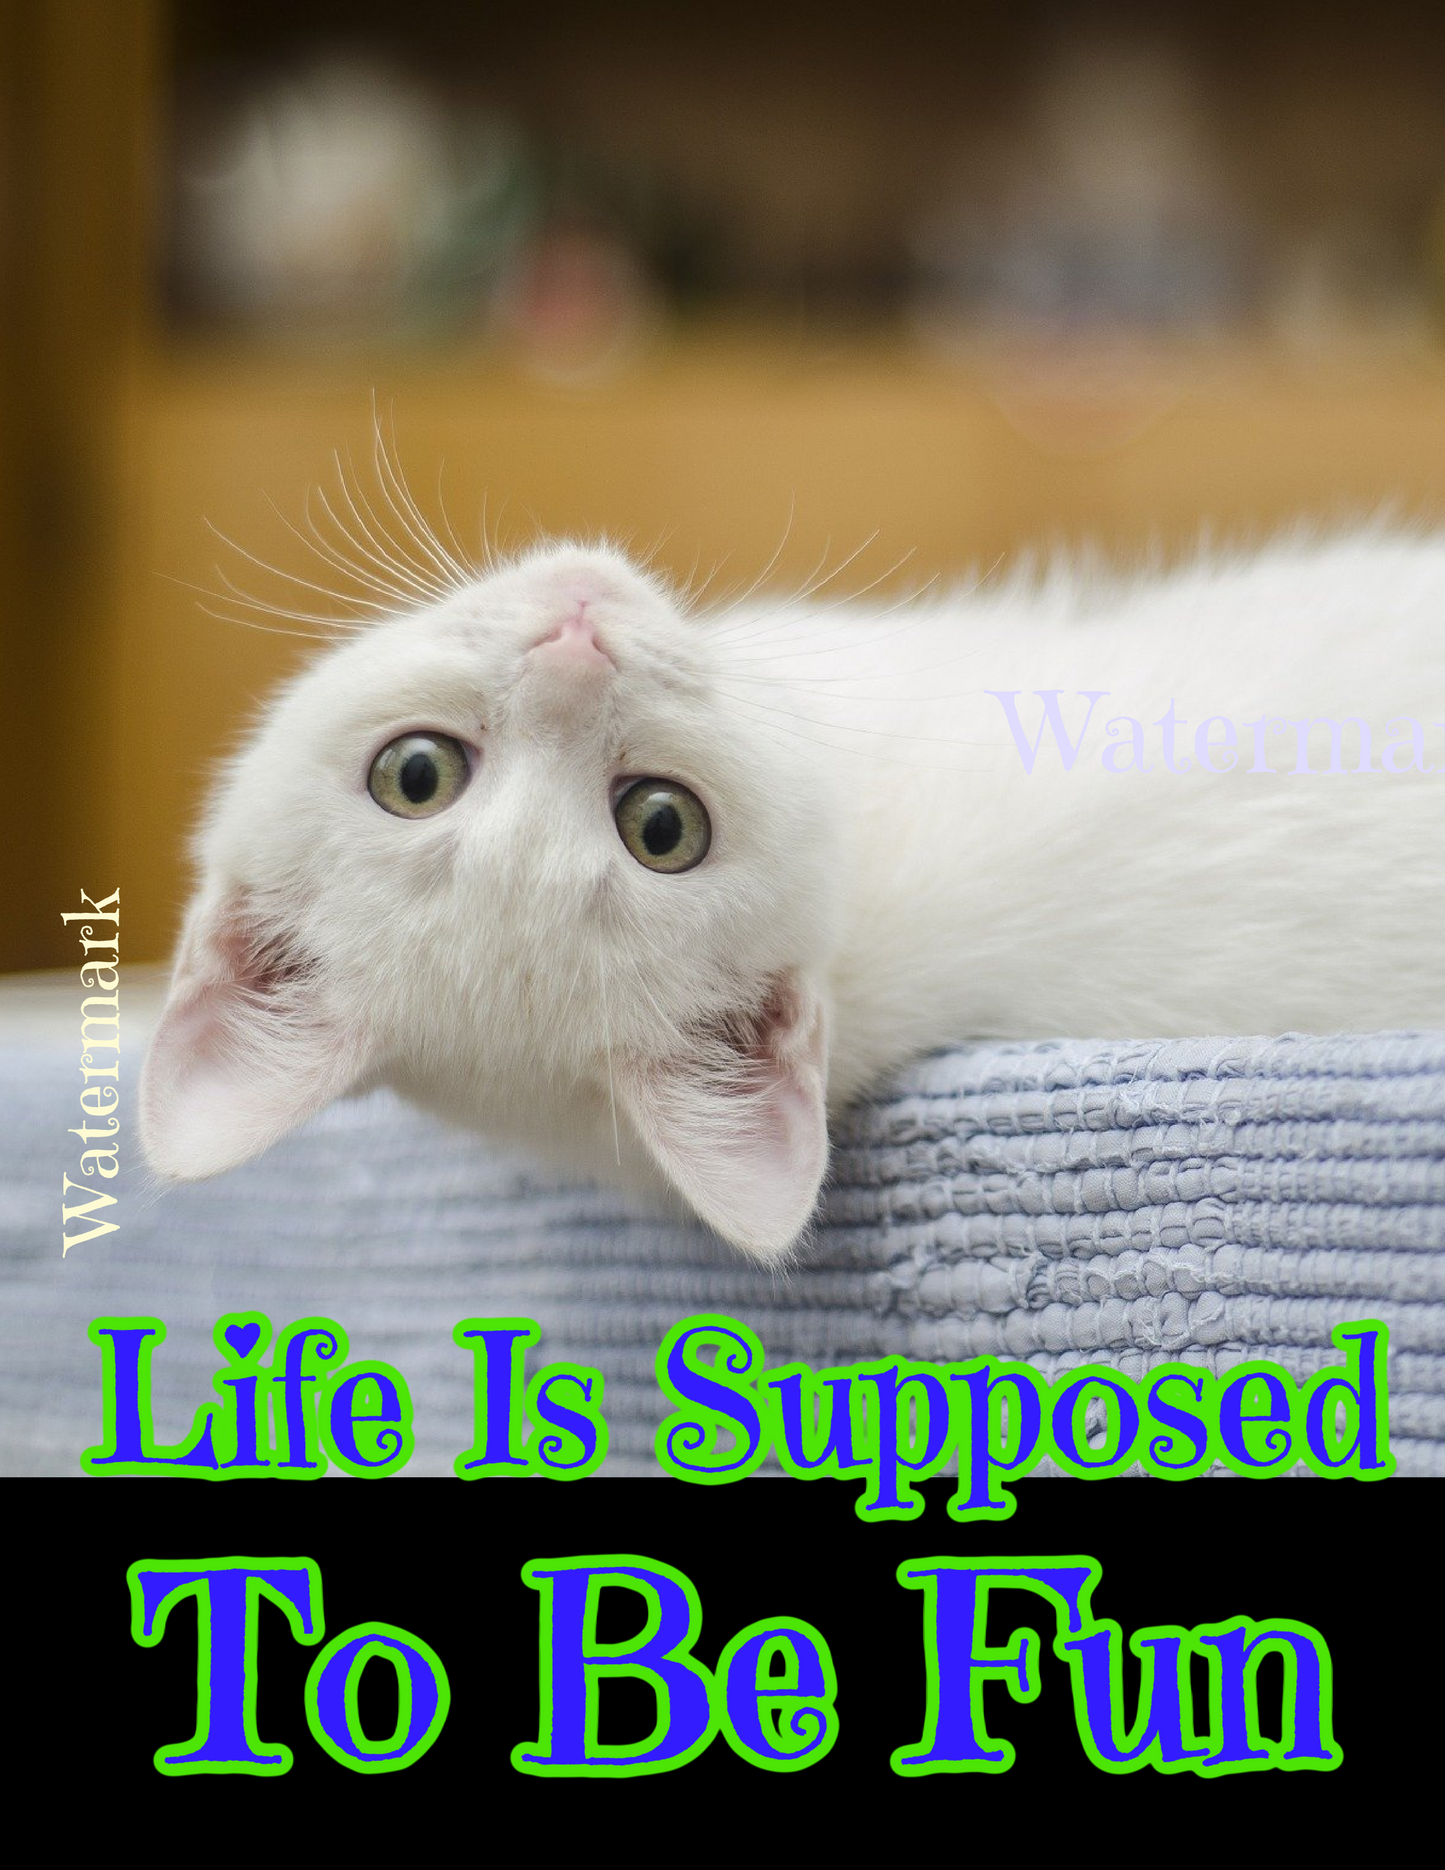 Life Is Supposed To Be Fun - Abraham Hicks - Wall Art White Kitten